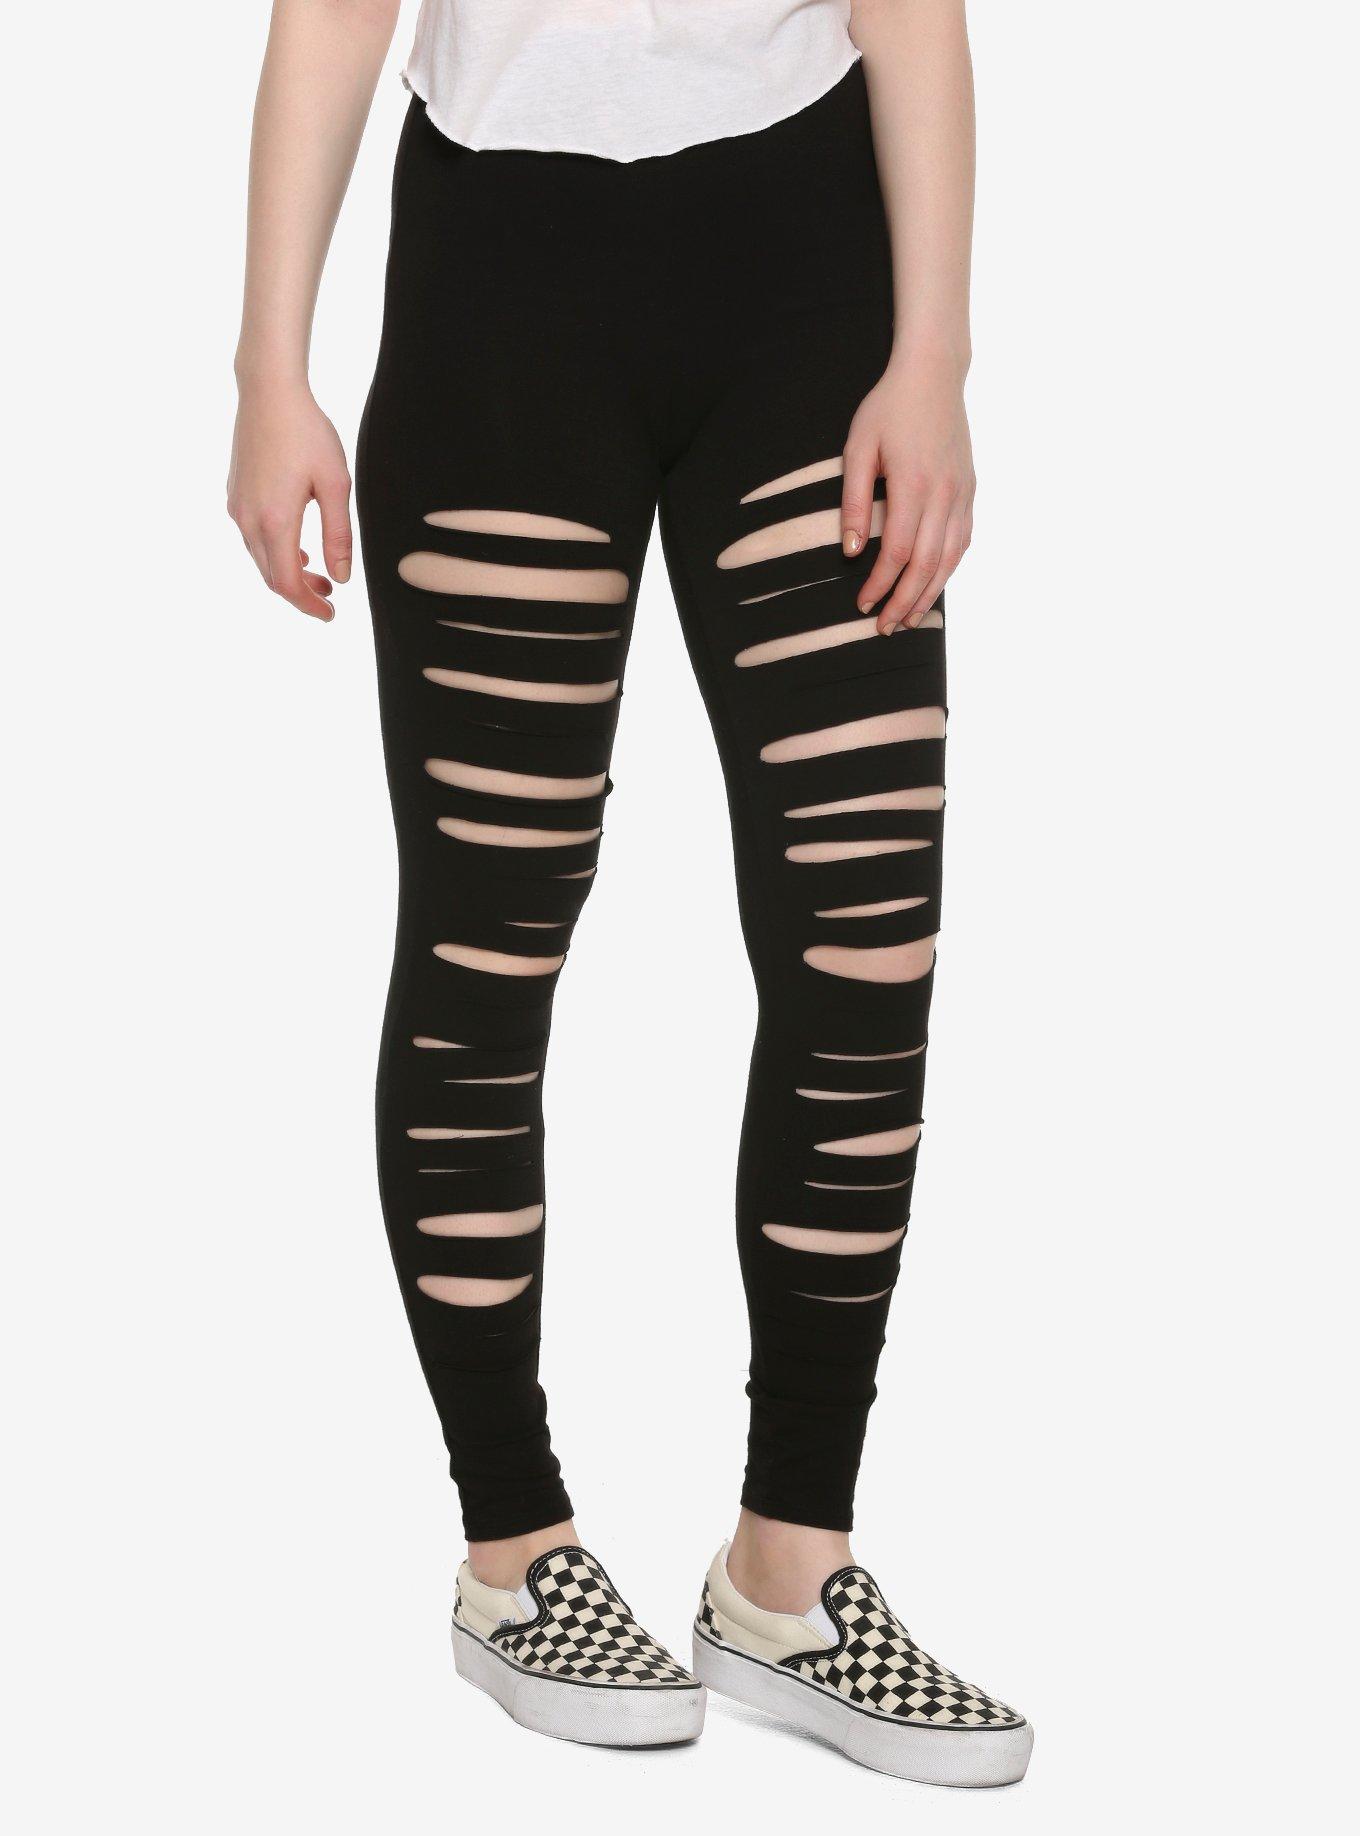 Ripped Leggings Outfits